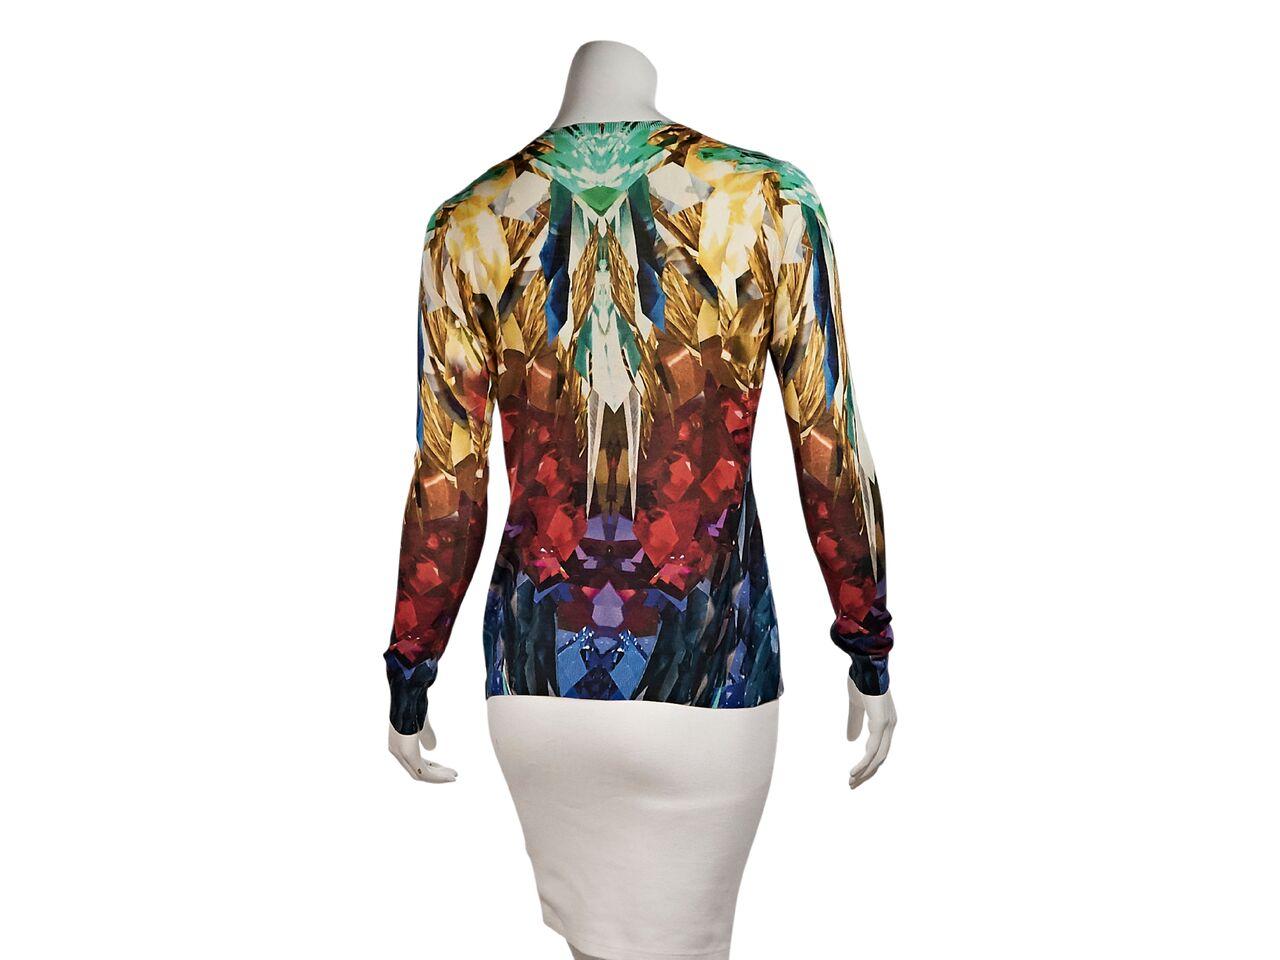 Product details:  Multicolor printed cardigan by Alexander McQueen.  Deep v-neck.  Long sleeves.  Button-front closure.  33